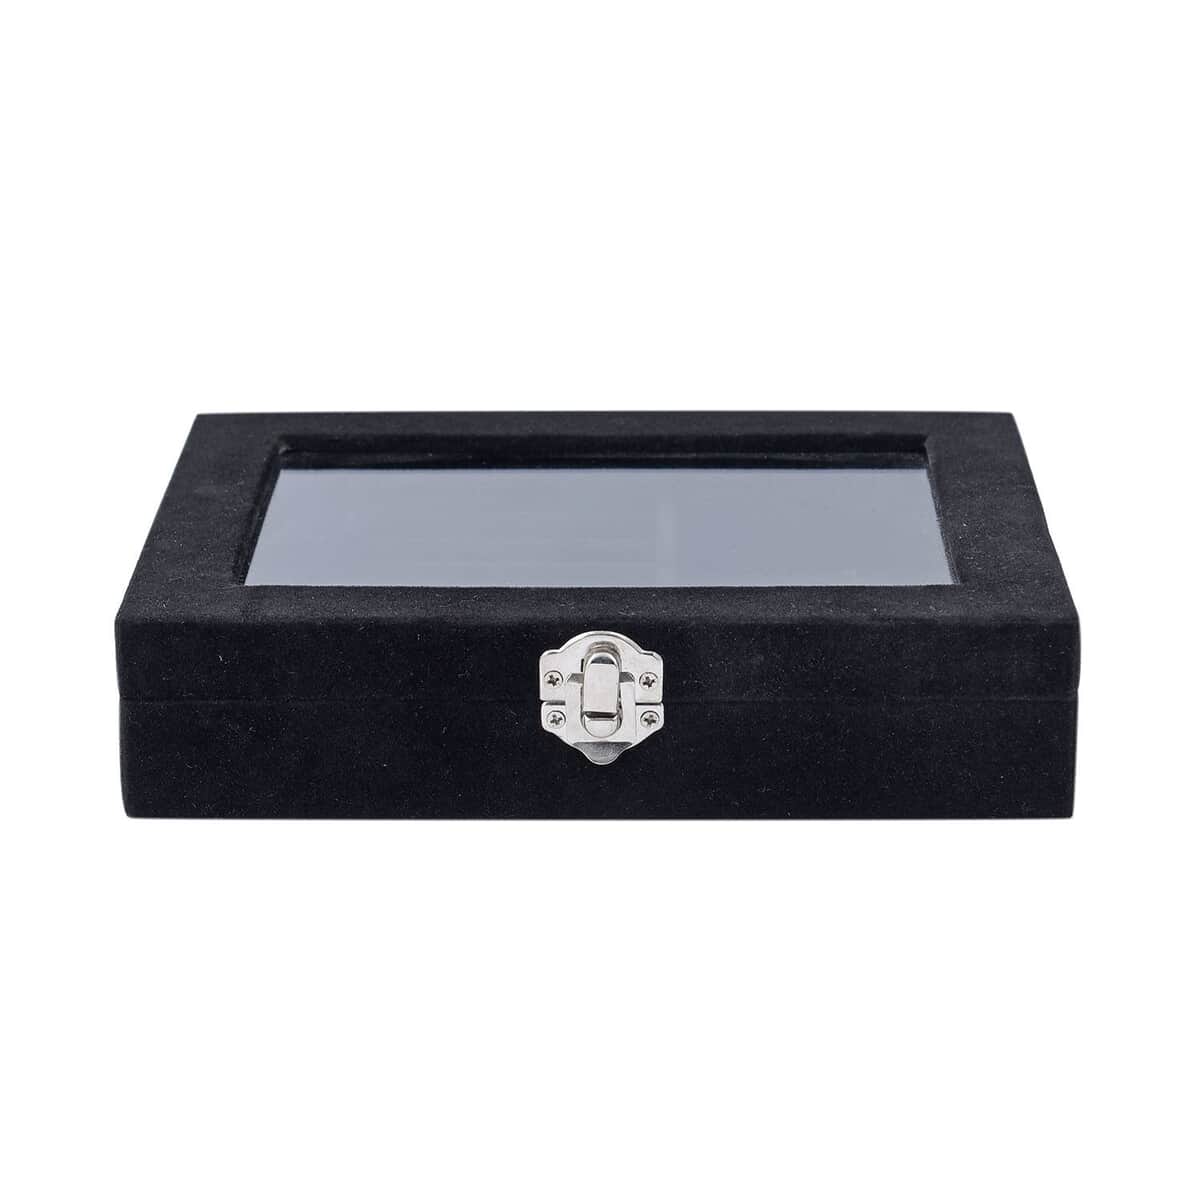 Black Velvet Jewelry Box with Anti Tarnish Lining & Lock (8x6x2) (Rings Hold Up to 28, Brooch, Pendant, Earrings) image number 1